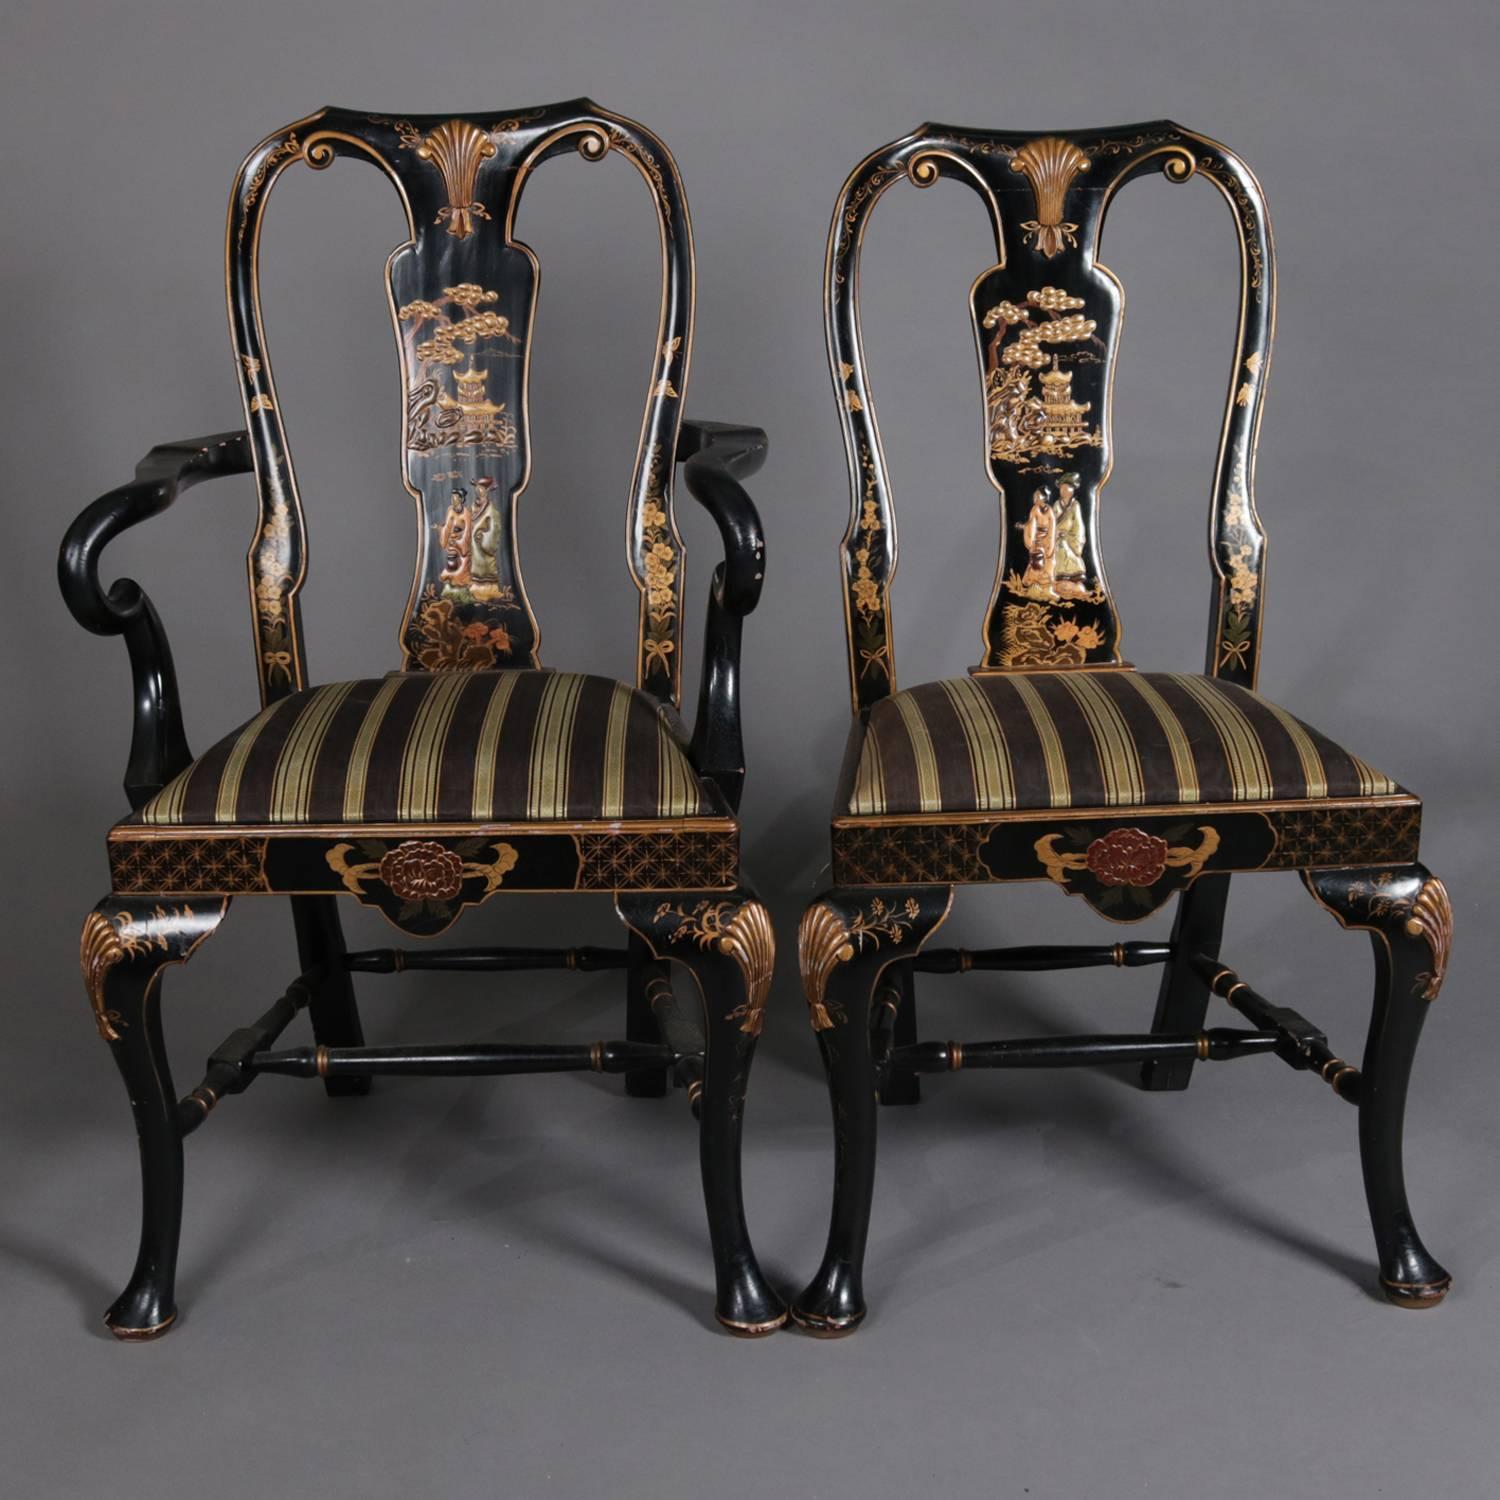 Set of nine Chinoiserie carved and upholstered dining chairs feature ebonized finish, hand-painted sculpted scene with villagers and pagoda, gilt banding and highlights throughout, seated on sculpted and gilt decorated cabriole legs; set with one